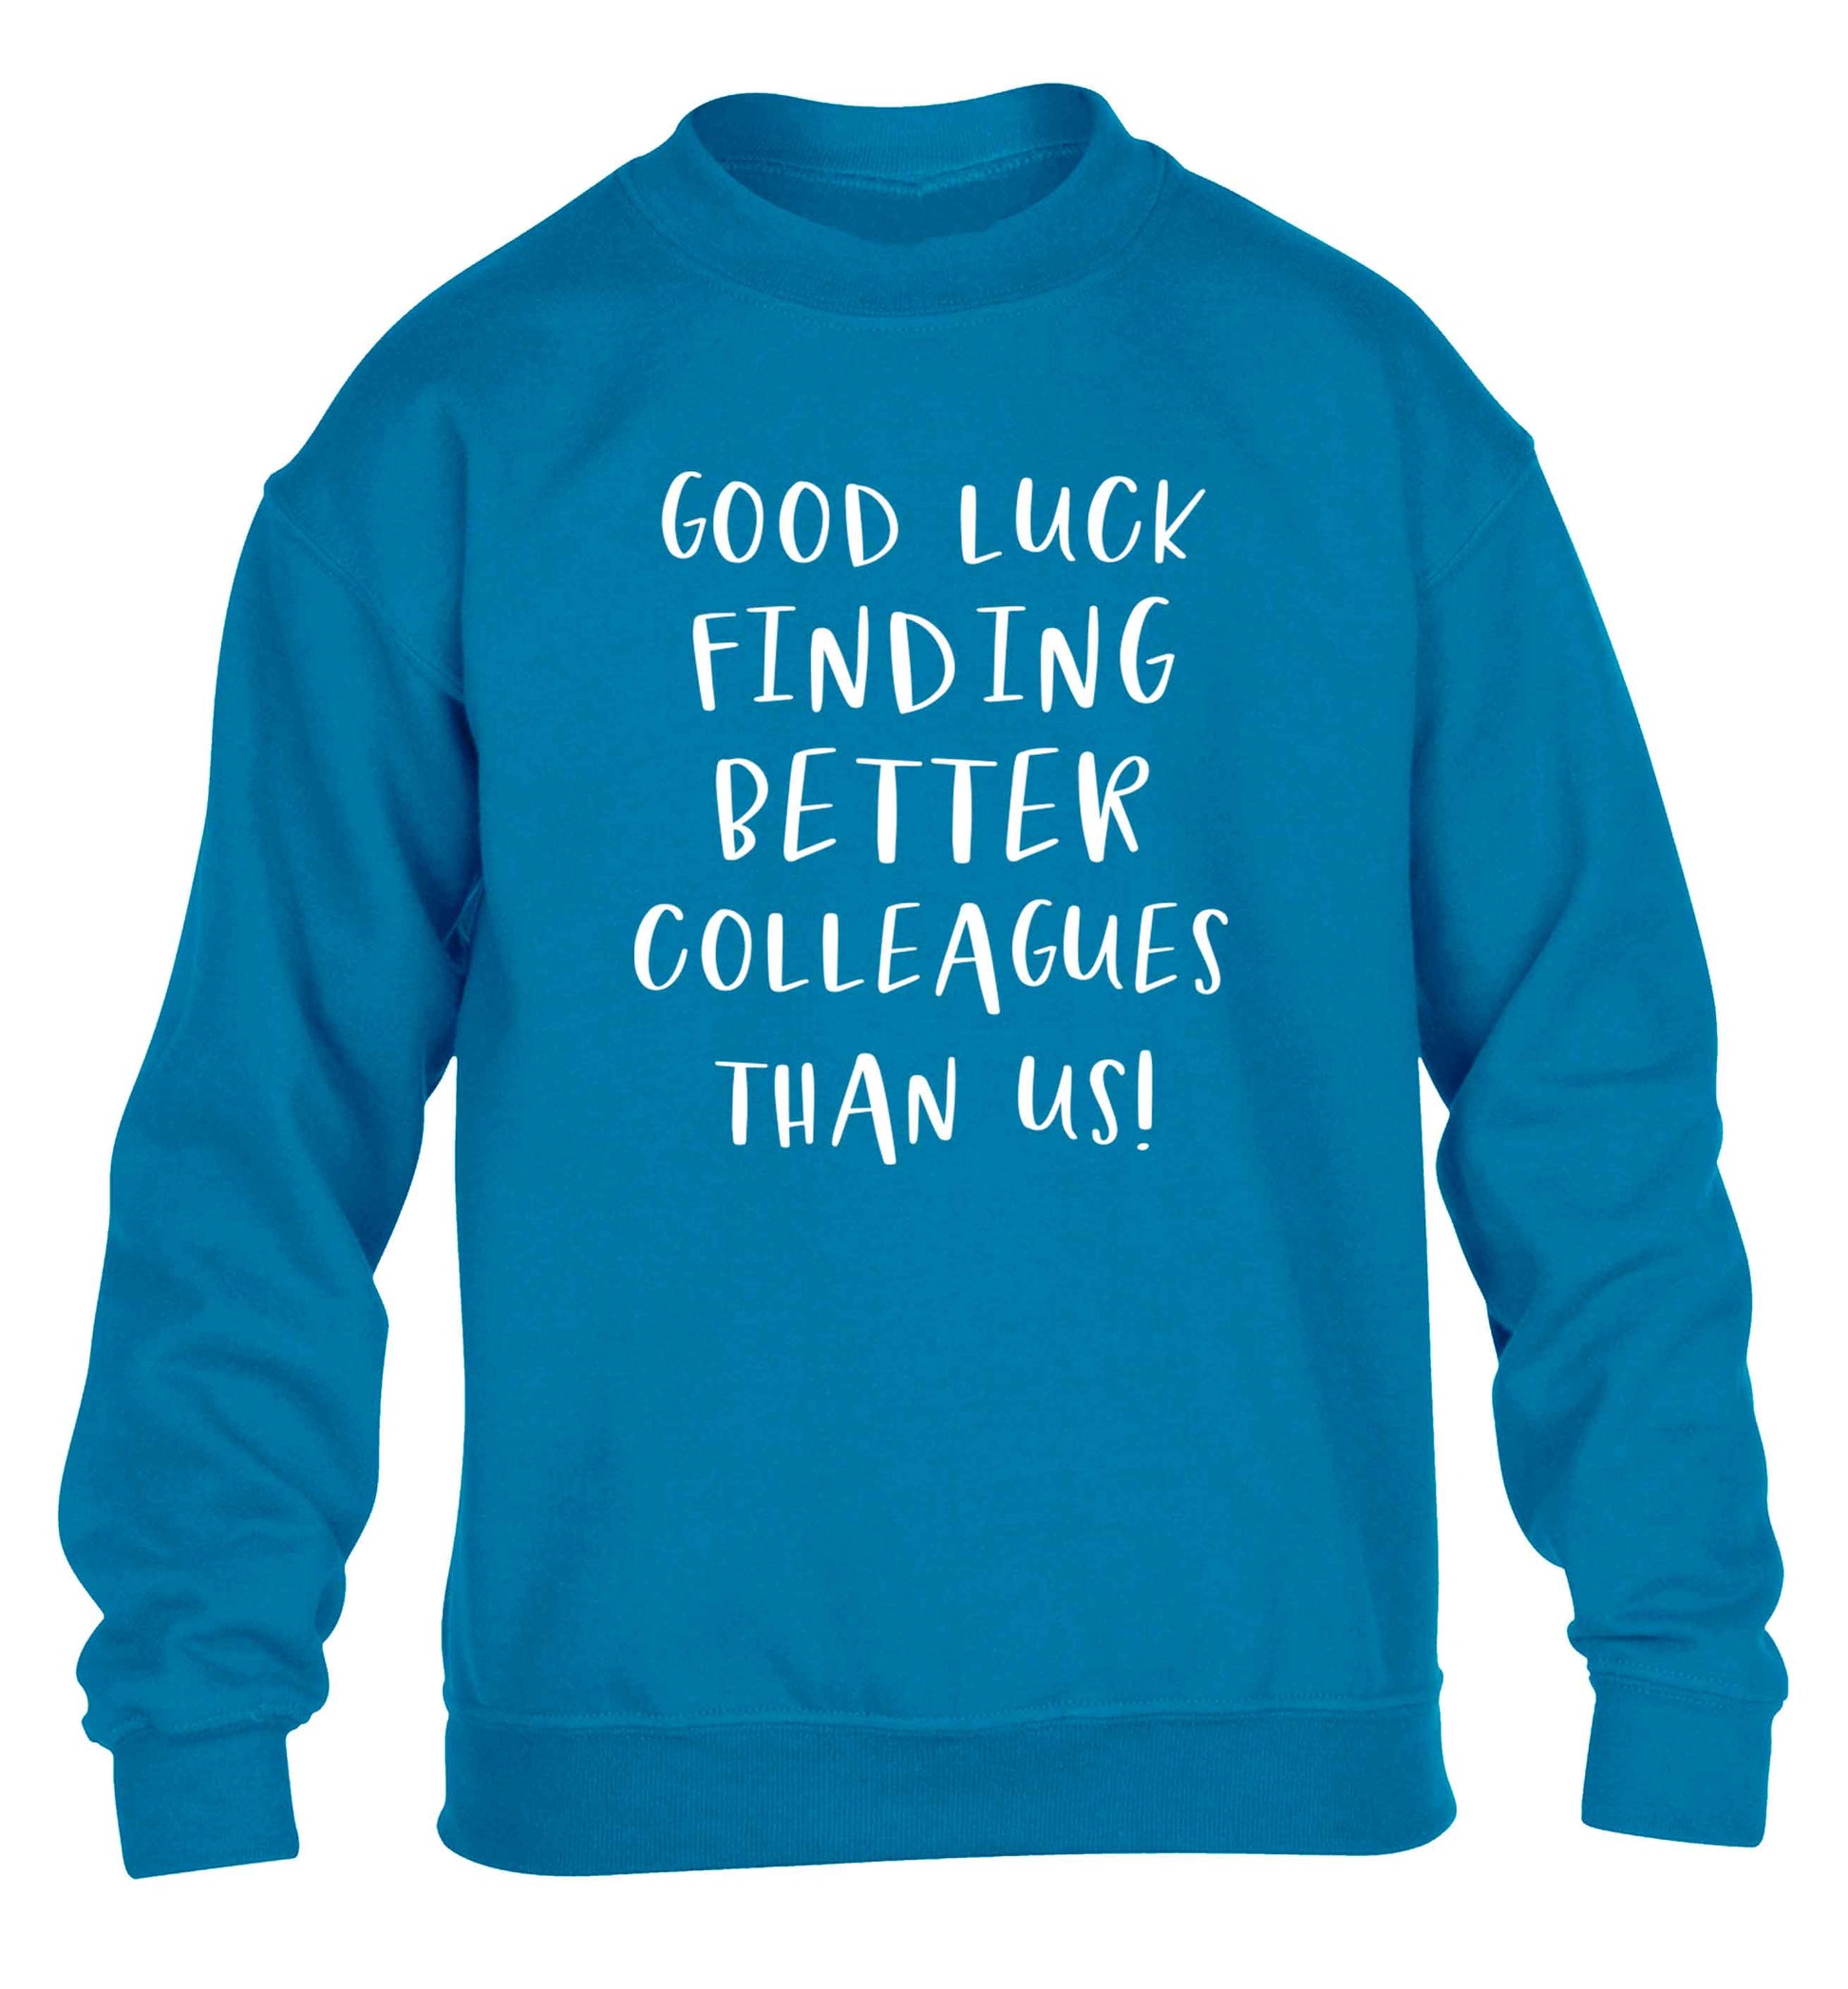 Good luck finding better colleagues than us! children's blue sweater 12-13 Years